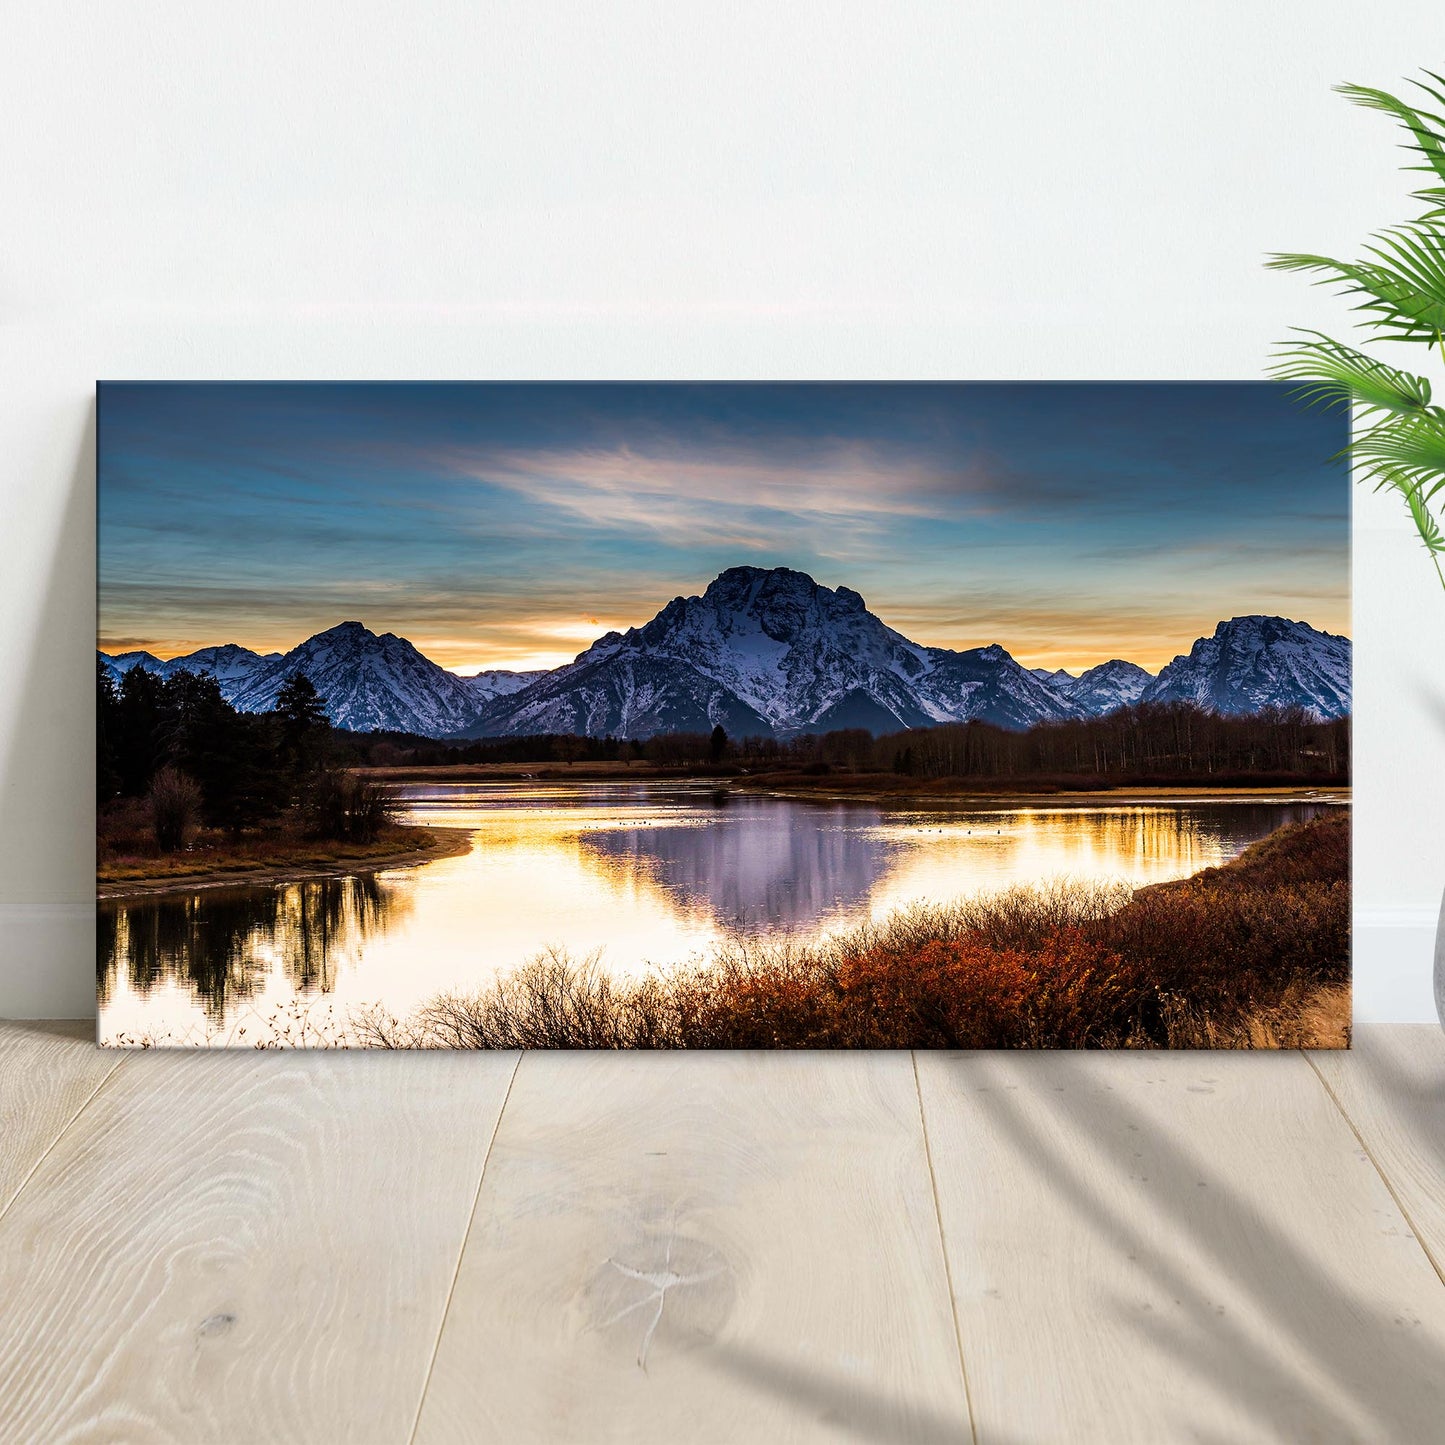 Arctic Mountain Canvas Wall Art - Image by Tailored Canvases